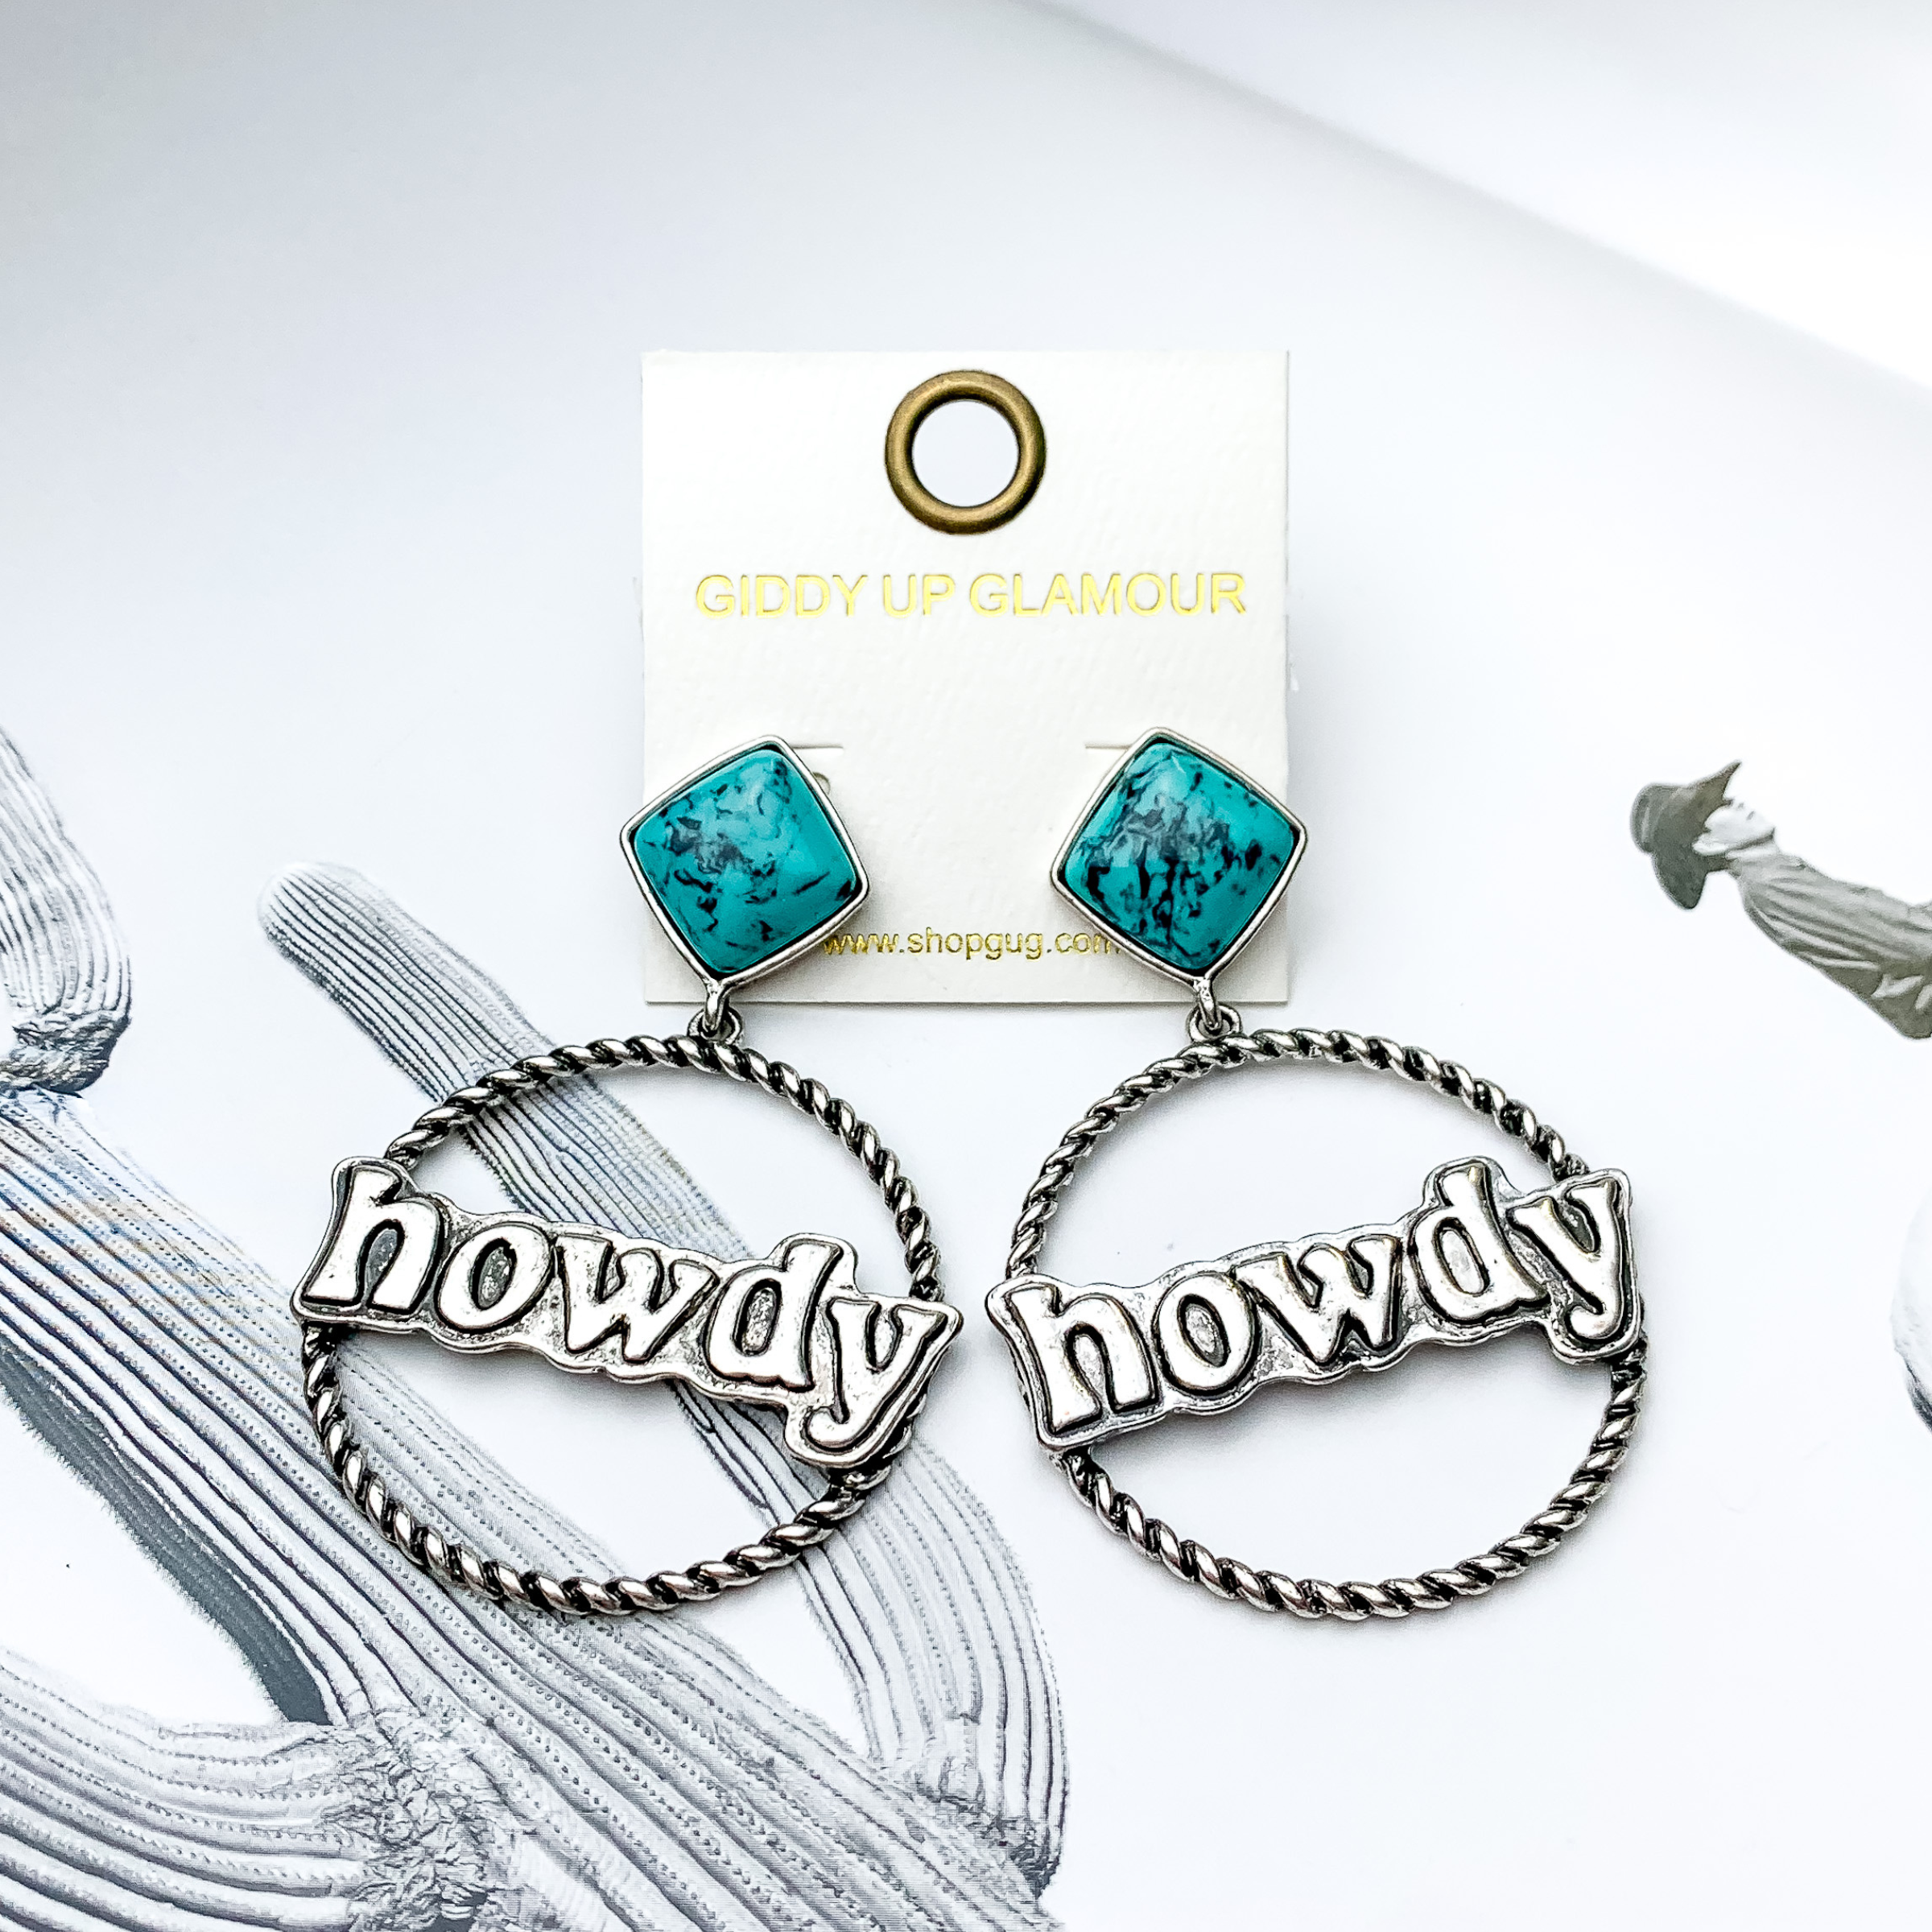 Square turquoise stud earrings with a silver rope hoop drop. In the center of the hoop, there is an engraved pendant that has the word "howdy" on it. These earrings are pictured on a black and white picture. 